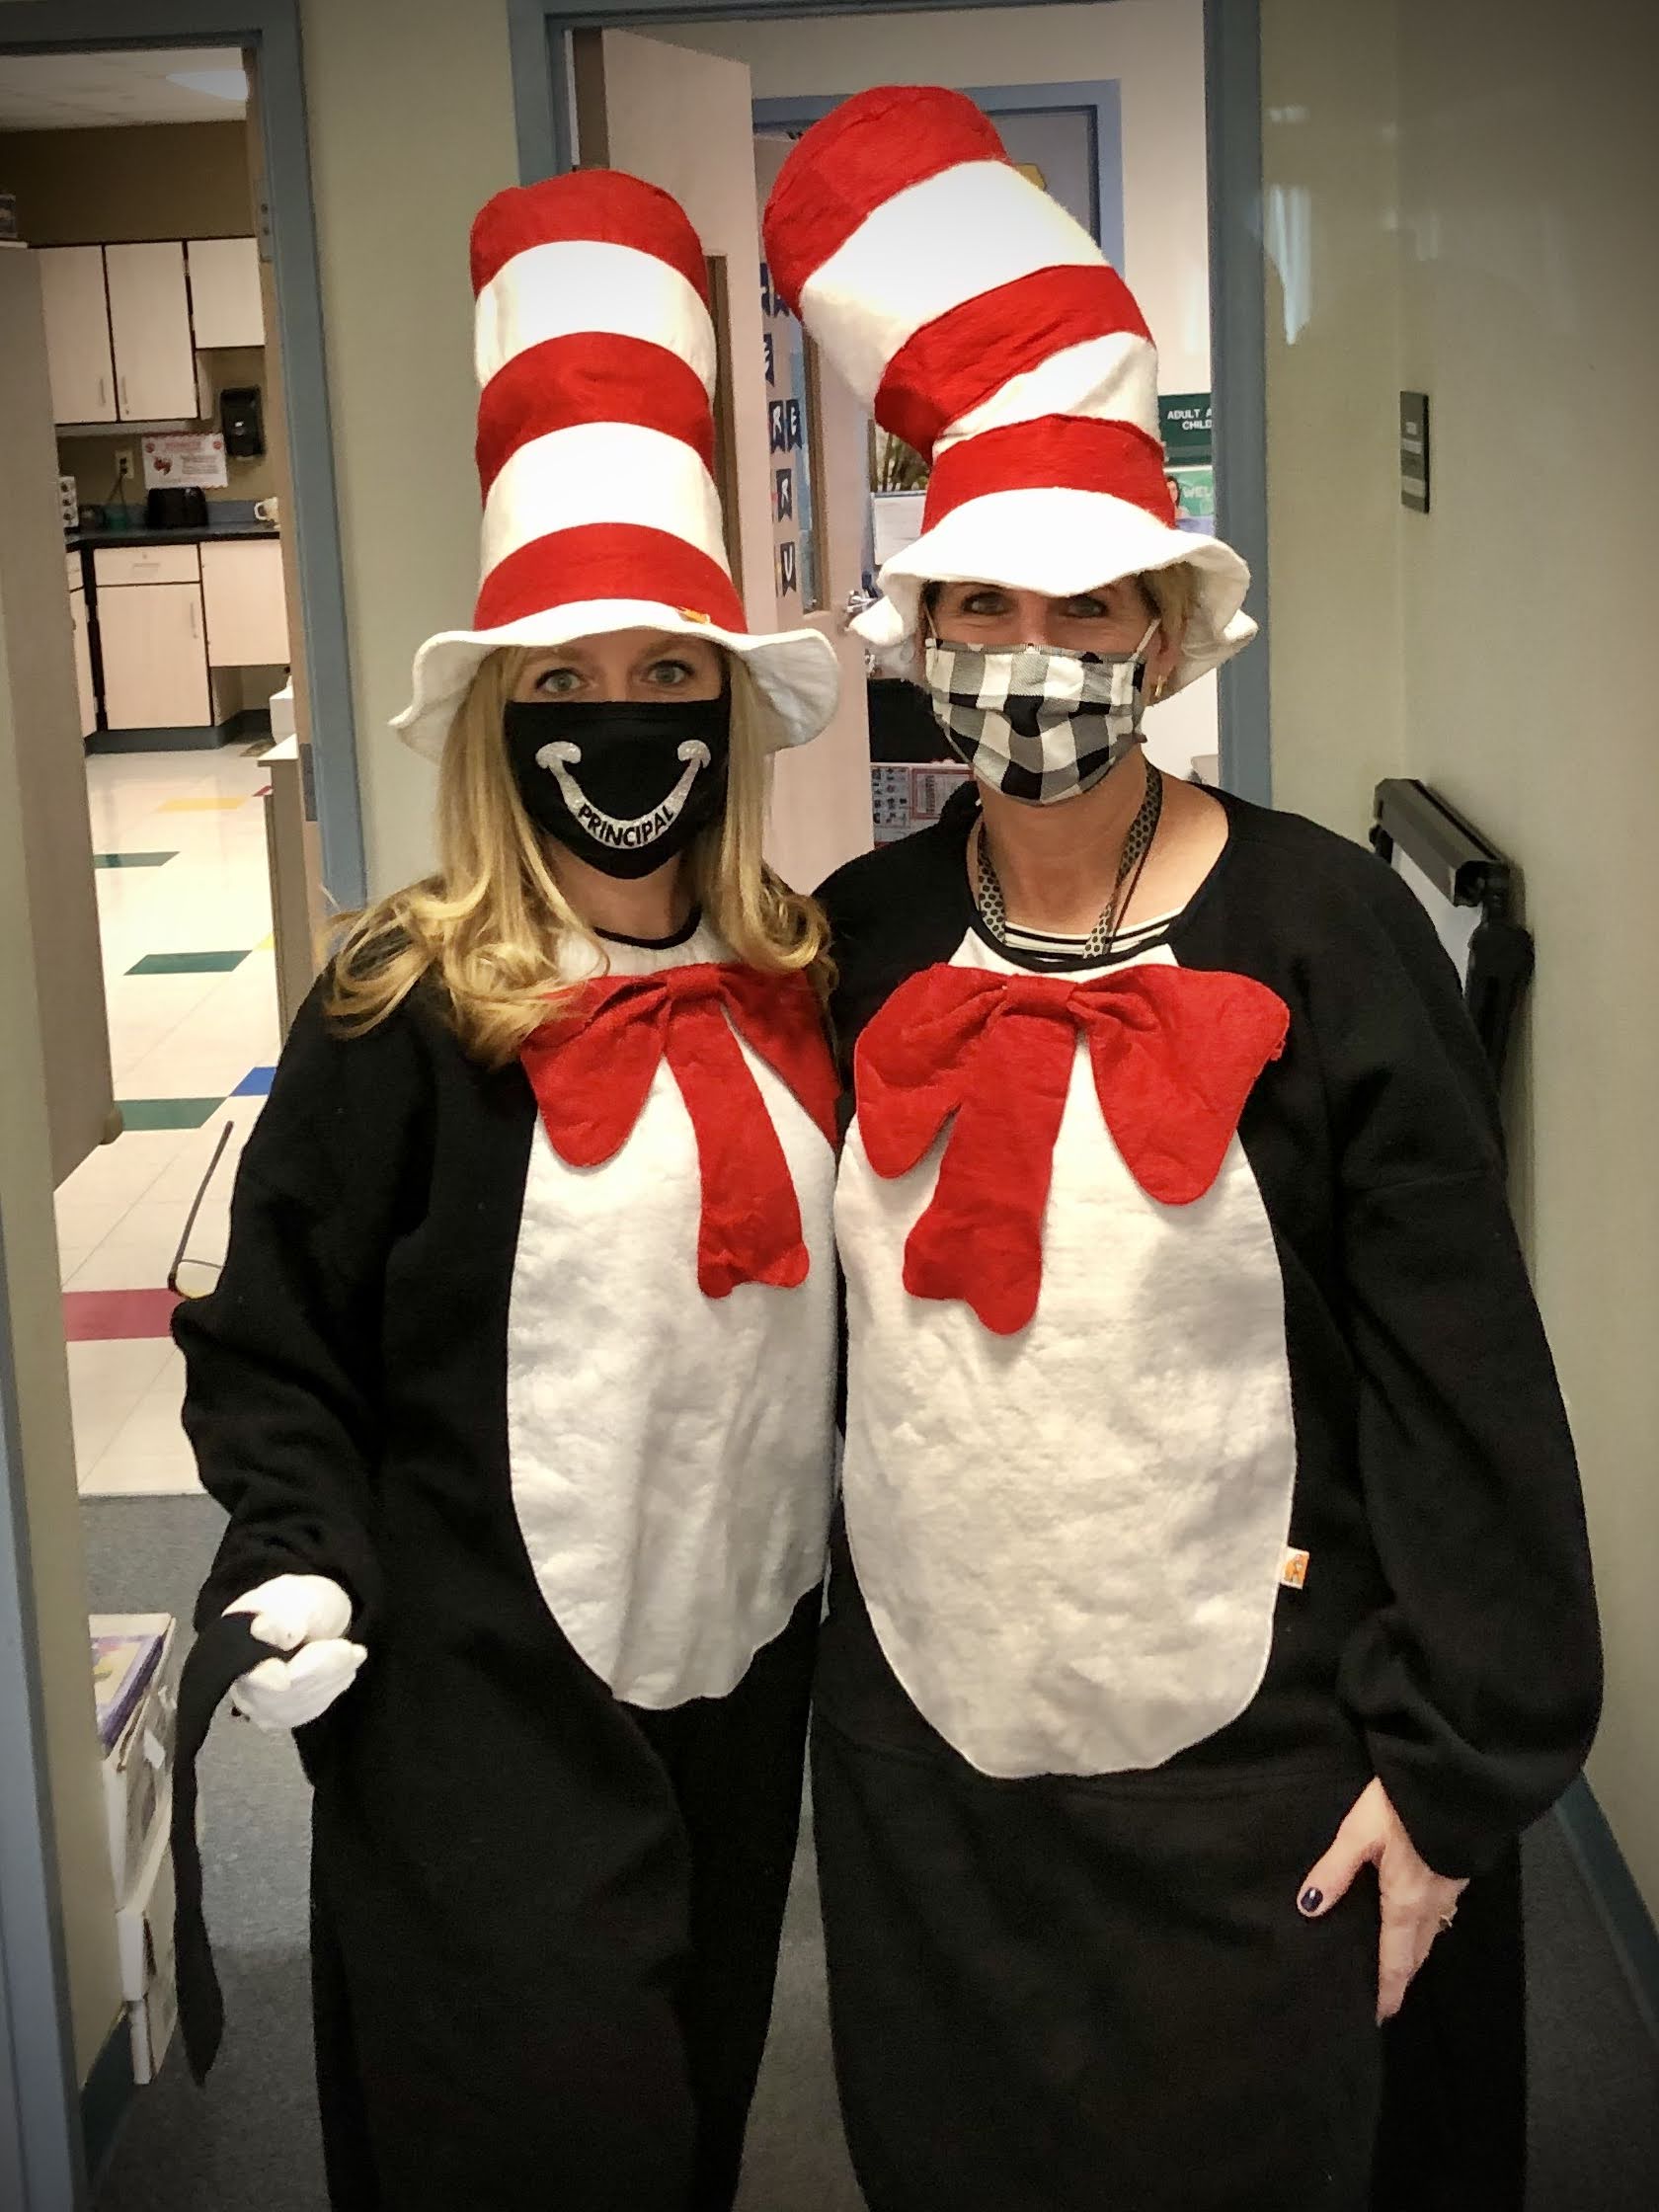 Two teachers dressed as the Cat in the Hat character